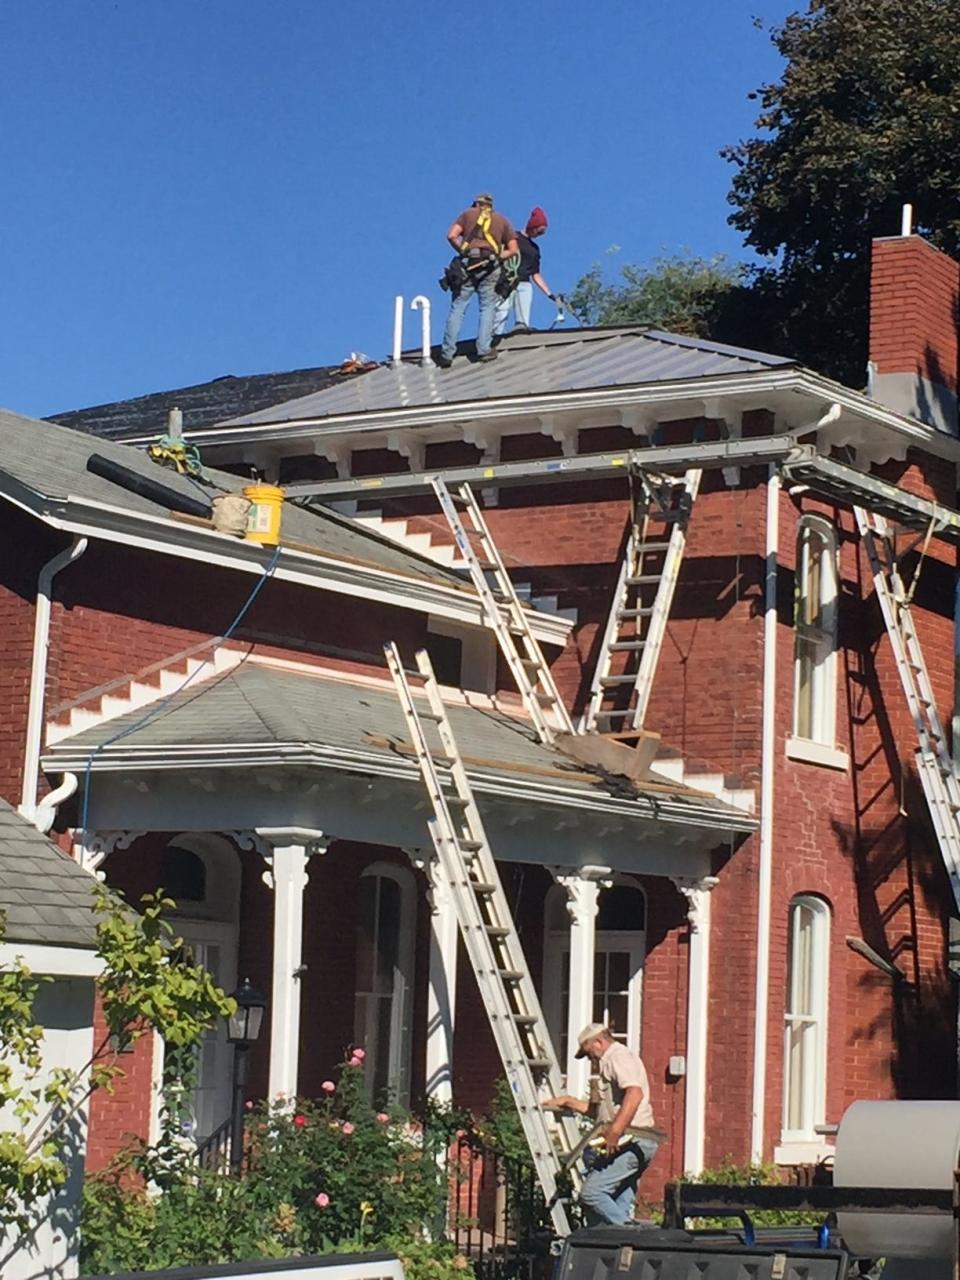 Workers place a new metal roof on the Mabel Hartzell Historical Home in 2018. The house, which was built in 1867 by Matthew Earley, is operated as a museum by the Alliance Historical Society.